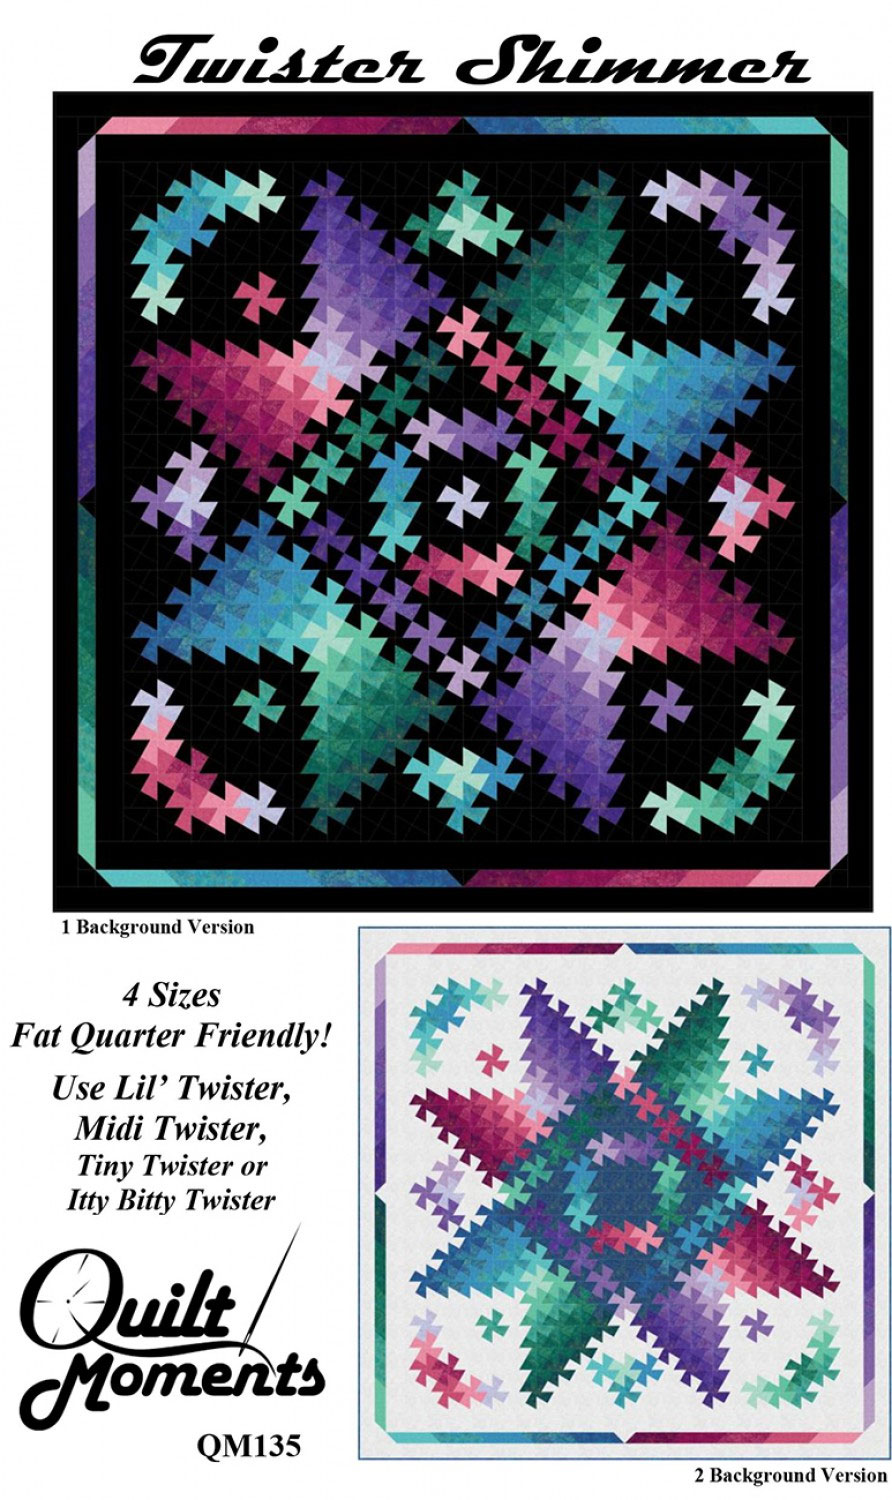 Twister-Shimmer-quilt-sewing-pattern-Marilyn-Foreman-Quilt-Moments-front